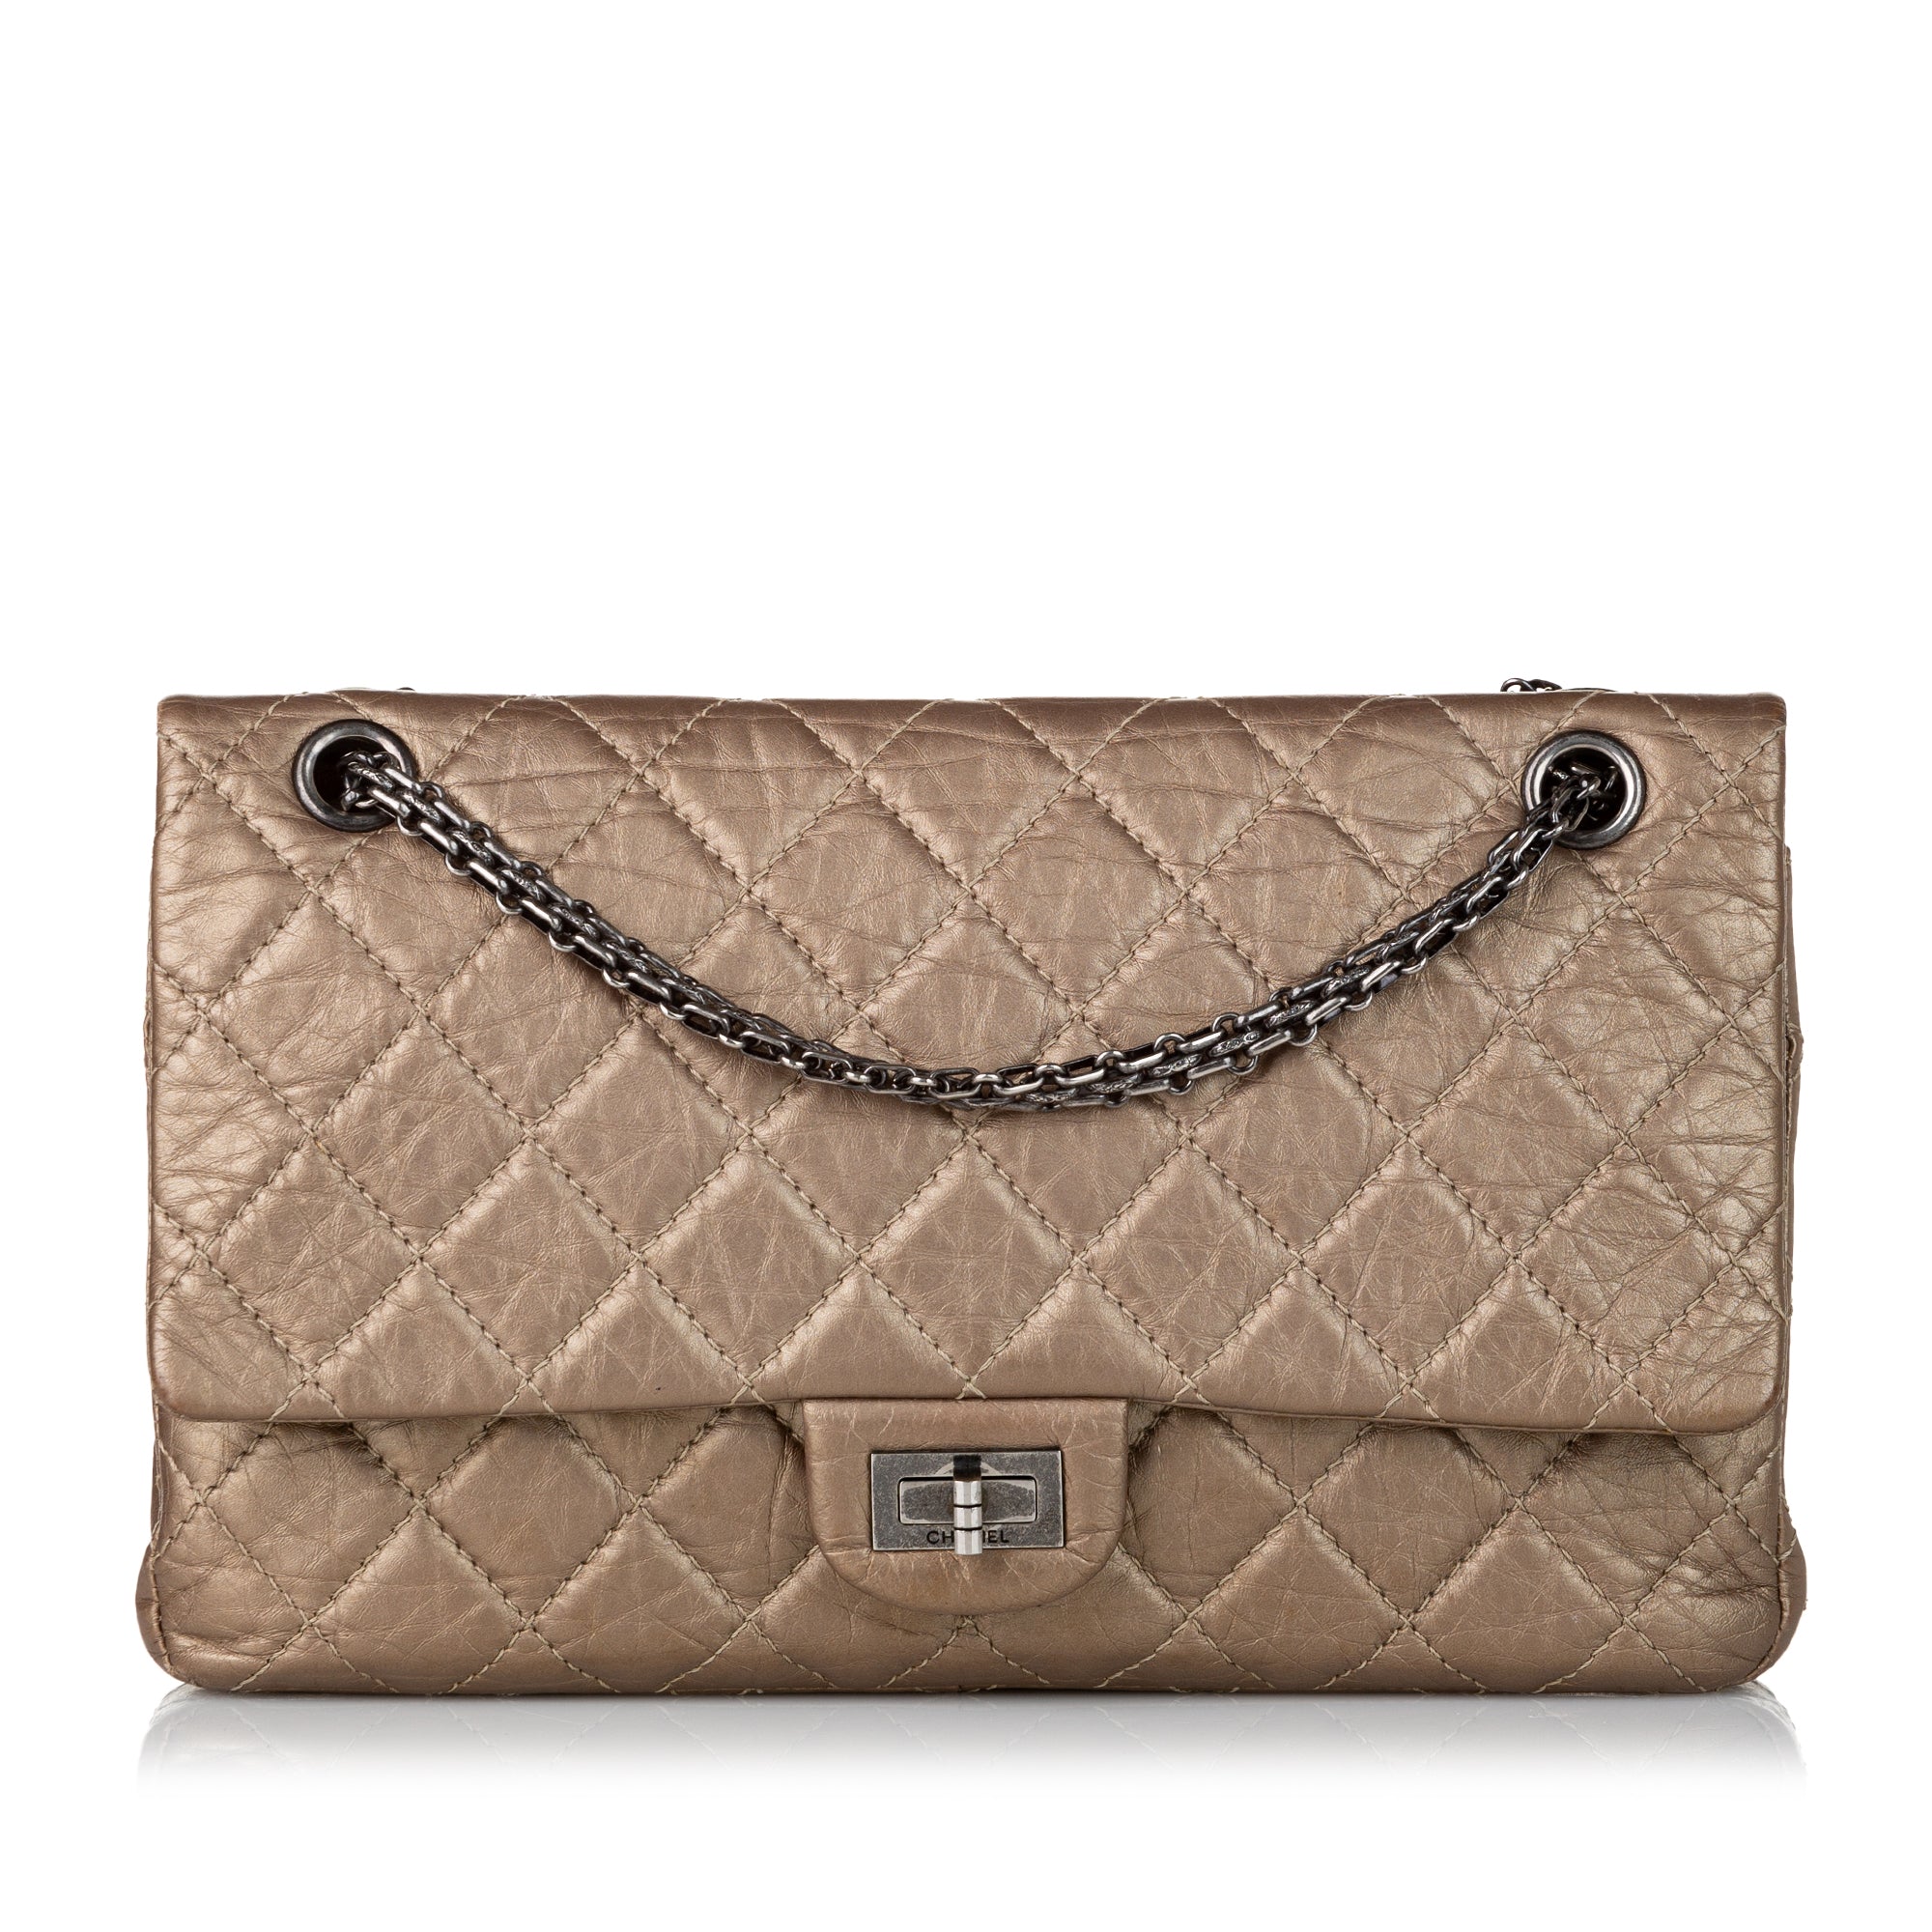 RvceShops Revival, Beige Chanel 2.55 Reissue Lambskin Leather Double Flap  Bag